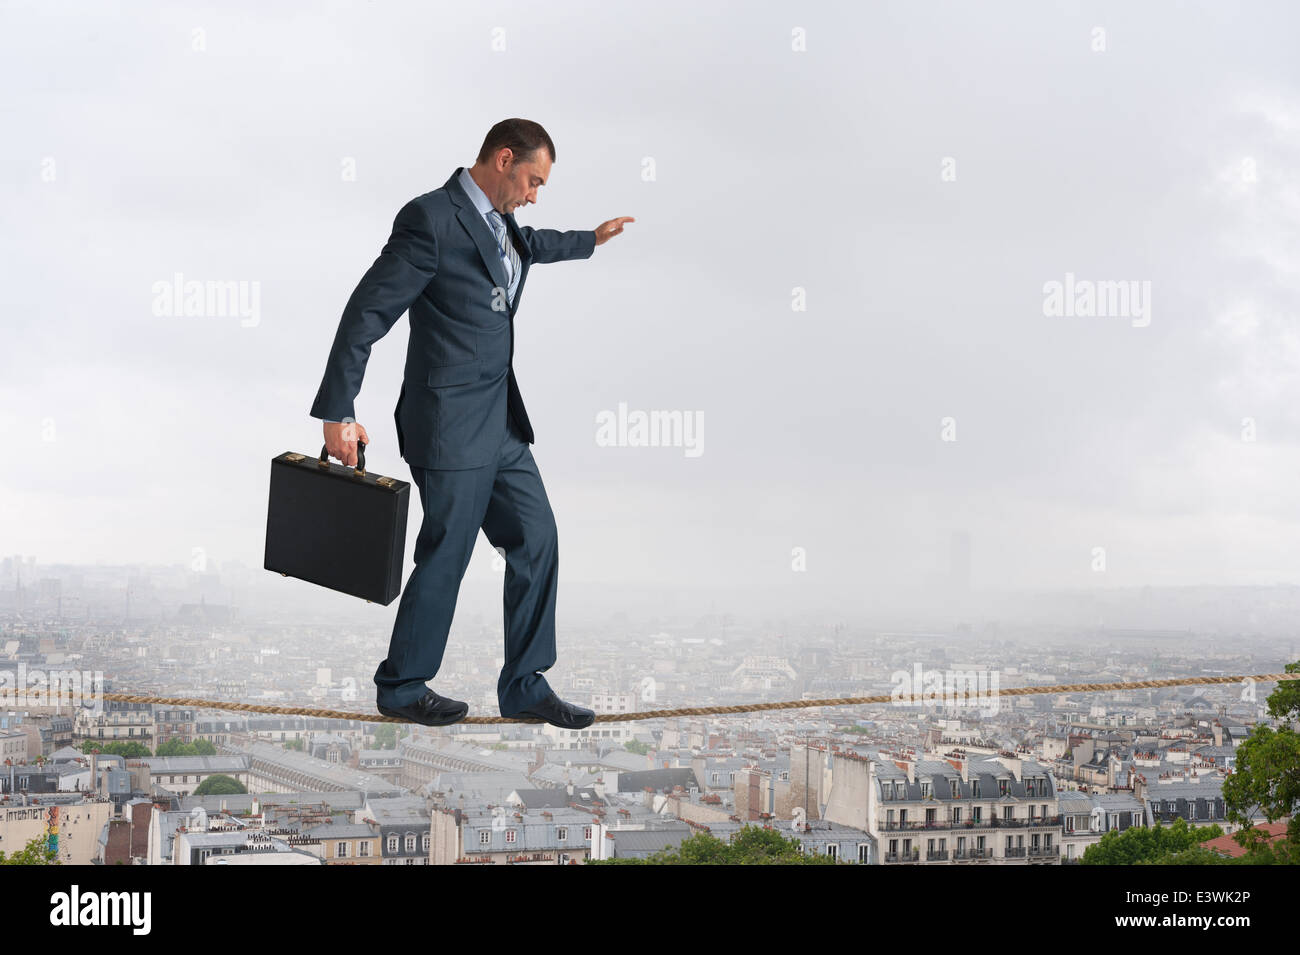 businessman walking across a highwire or tightrope balancing above the city Stock Photo